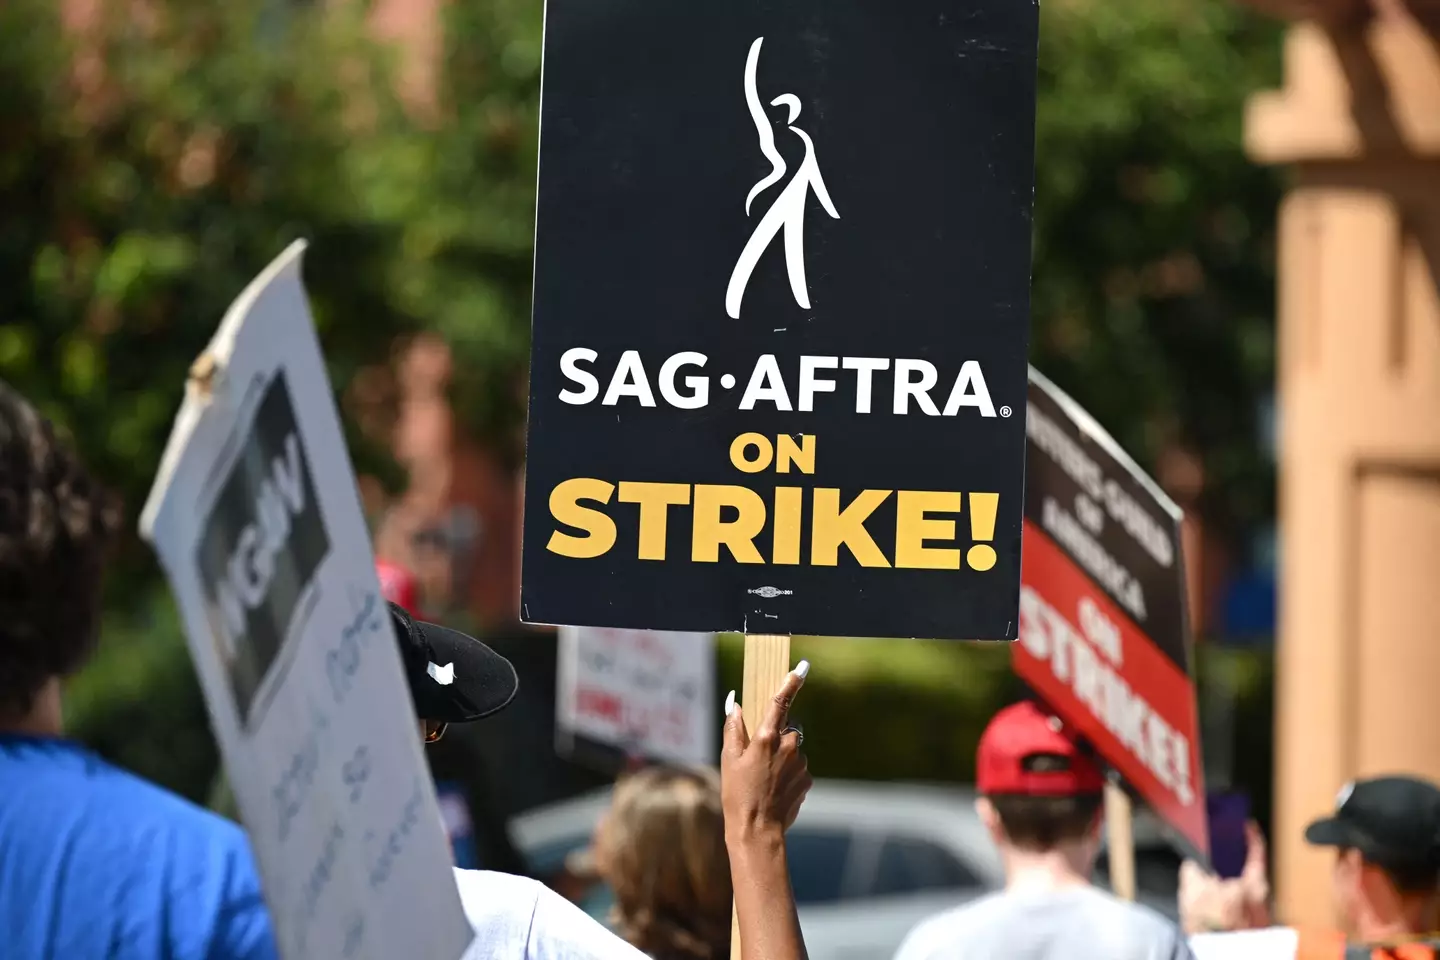 SAG AFTRA has joined the strike.